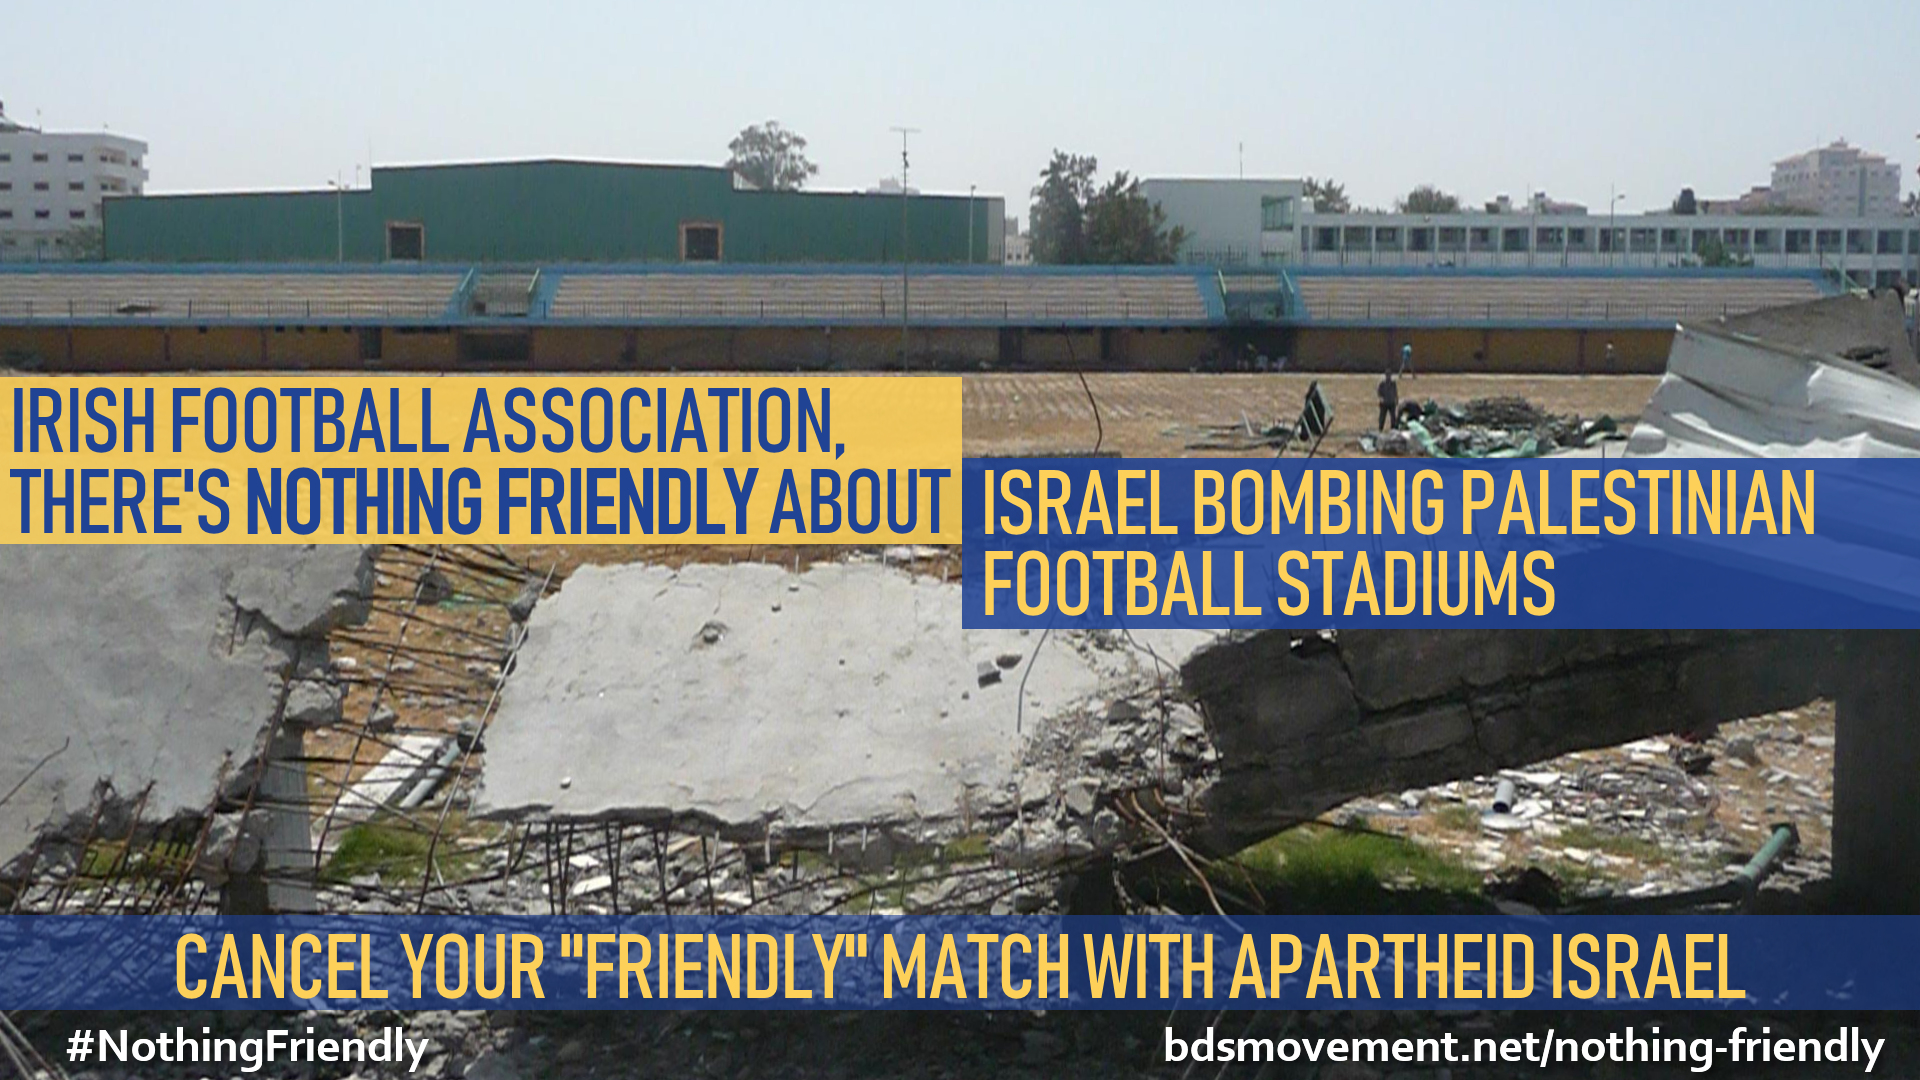 Irish Football Assoc, there's nothing friendly about bombing Palestinian football stadiums